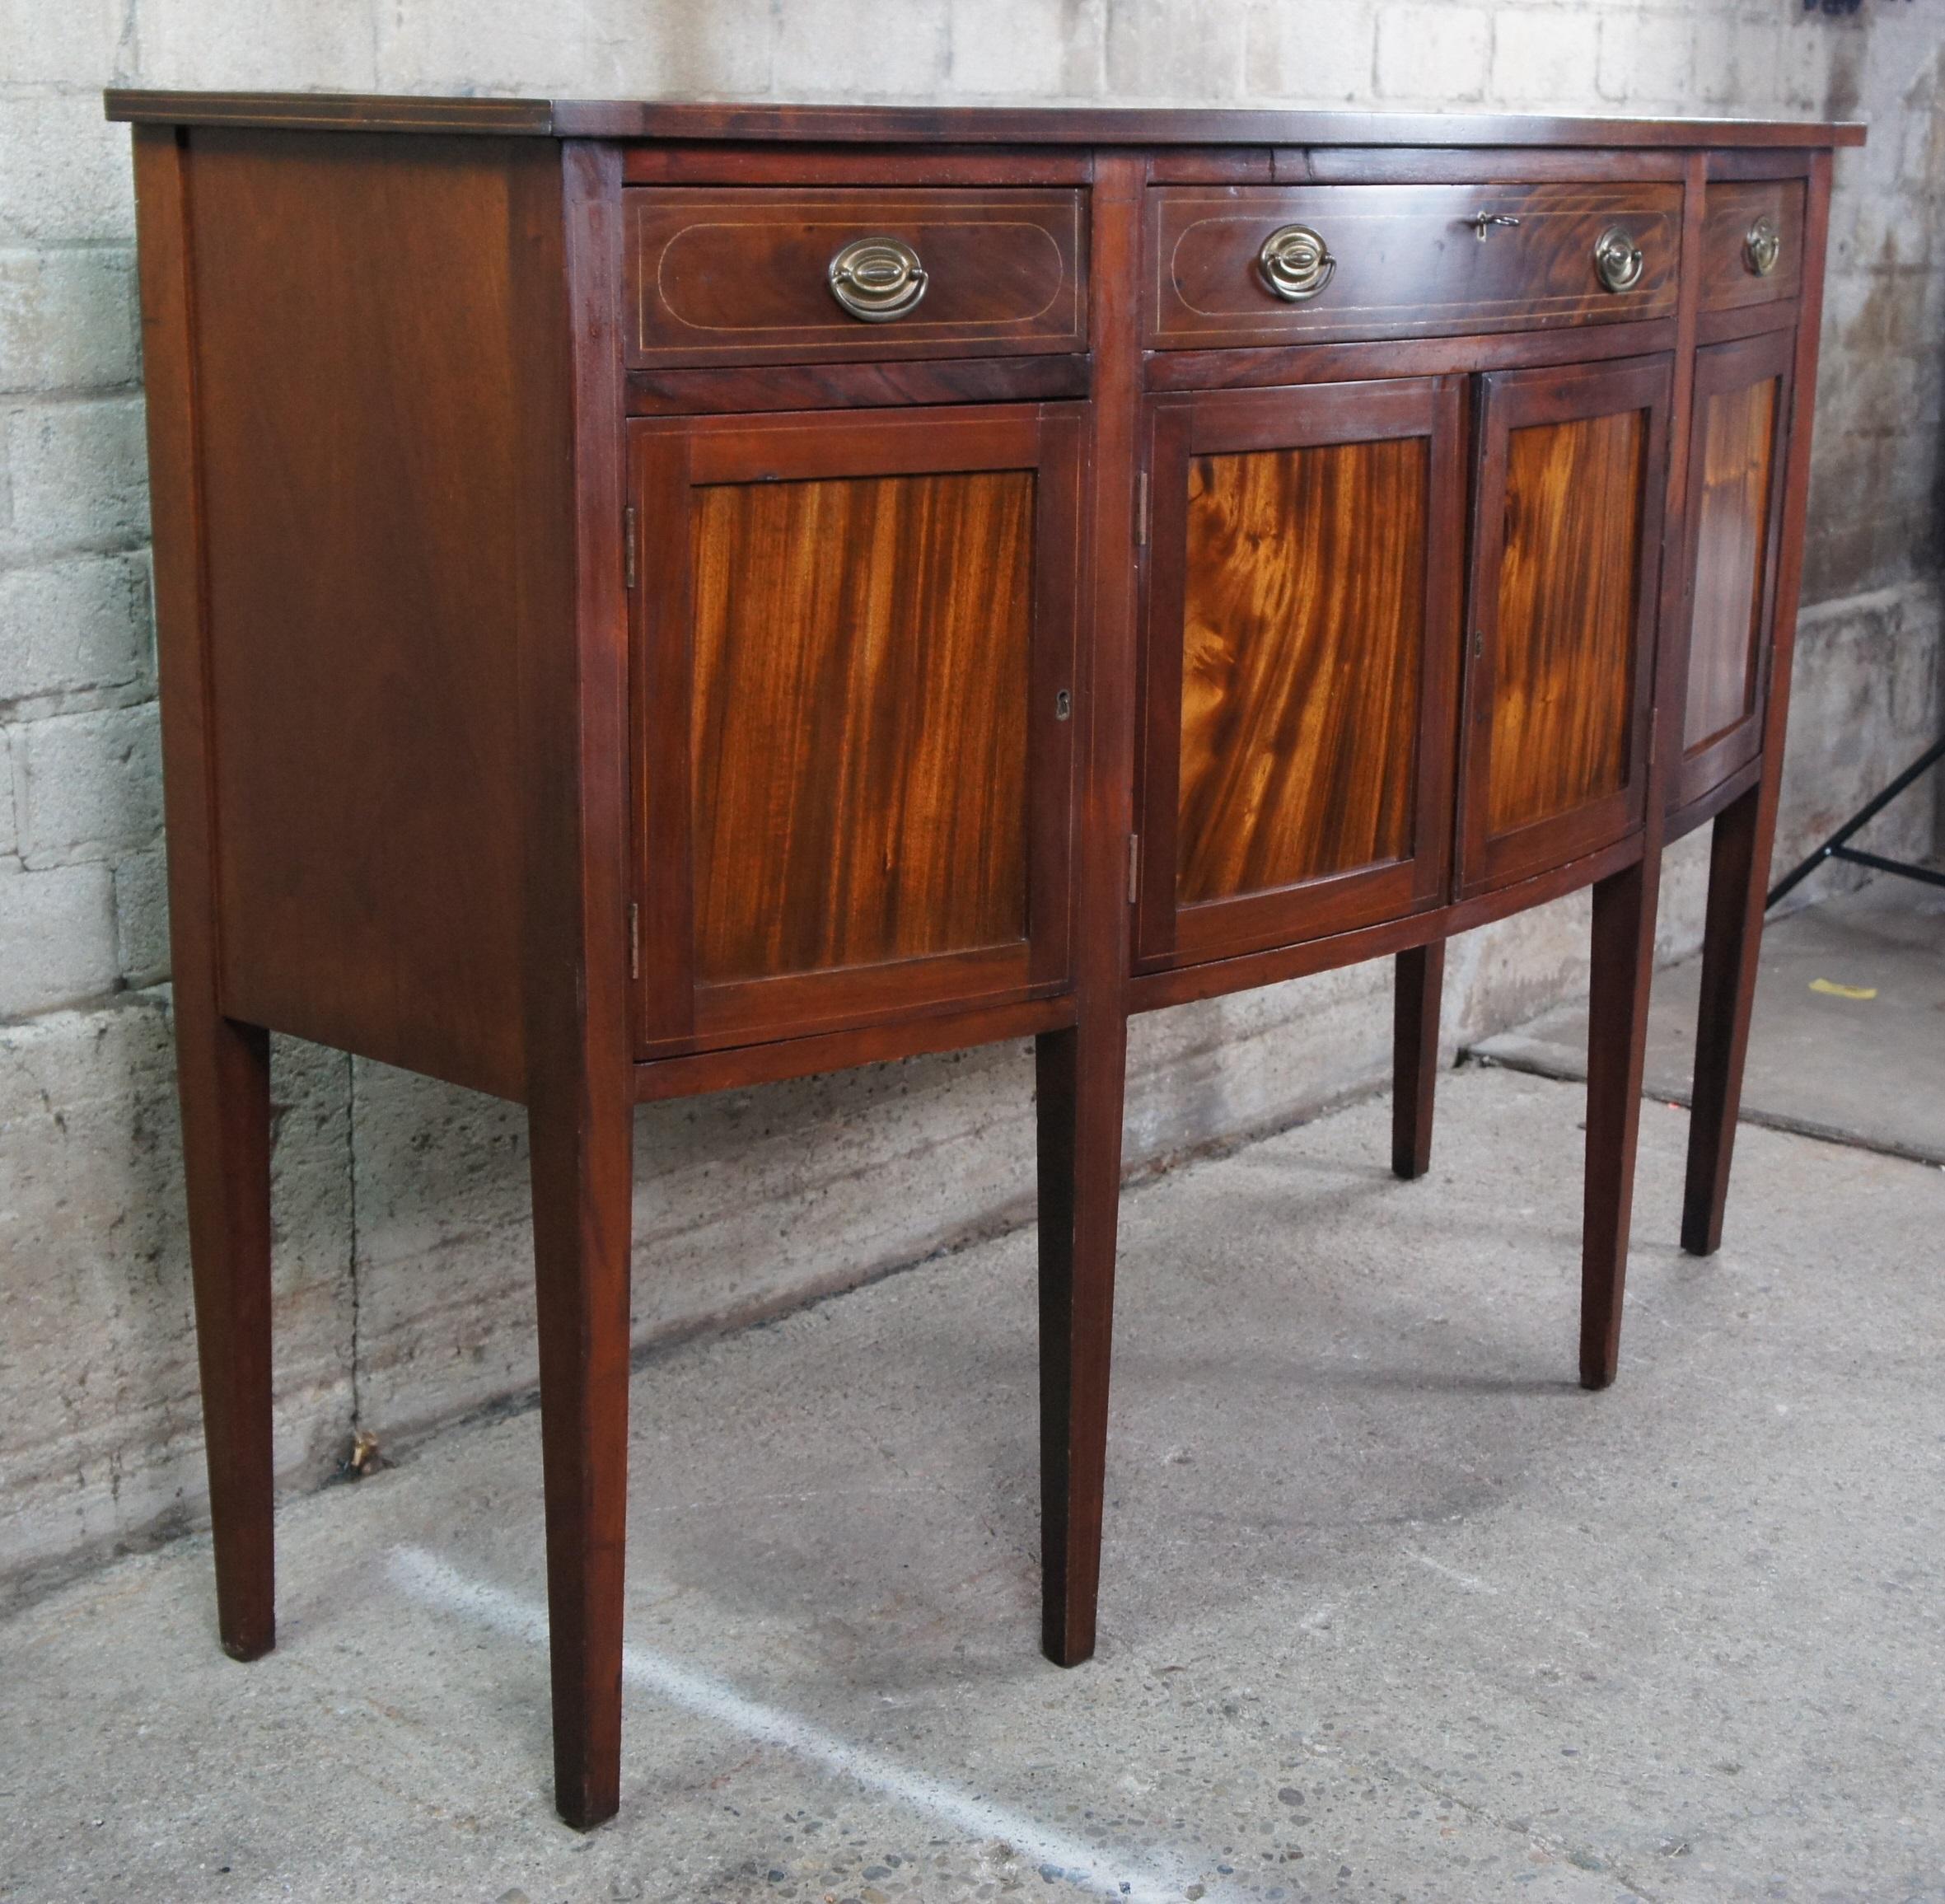 19th Century Antique 19th C. American Sheraton Bowfront Mahogany Buffet Sideboard Console